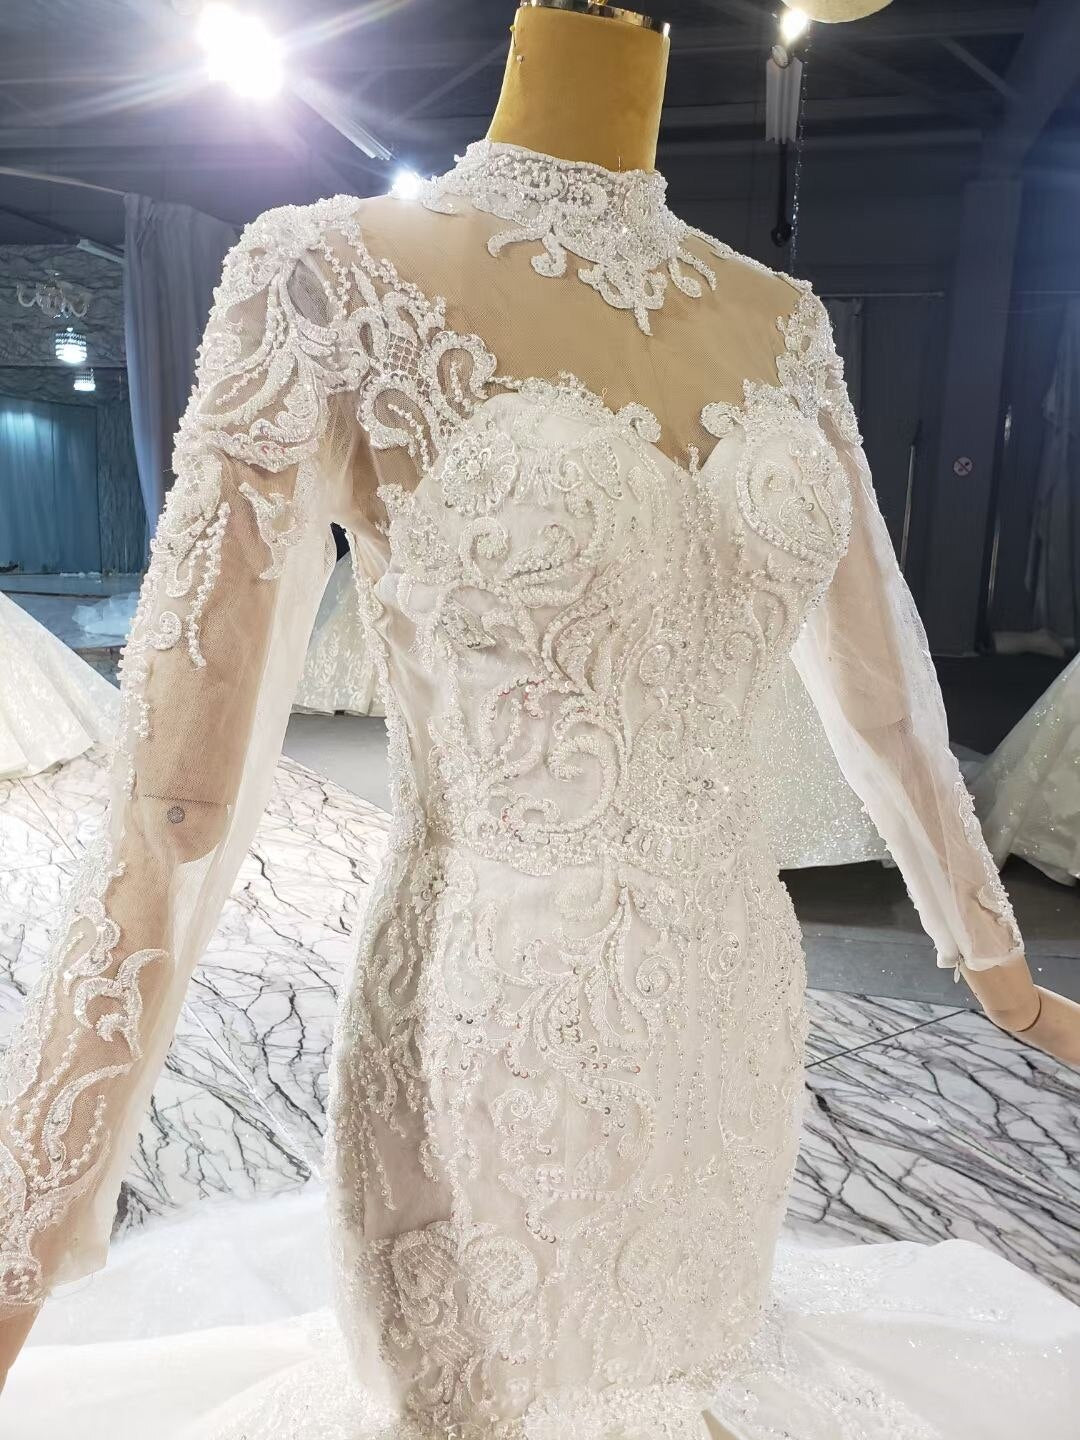 African Luxury Lace Mermaid Wedding Dresses 2021 Illusion Neck Long Sleeve Detachable Train Appliques Beads Bridal Gowns Arabric - LiveTrendsX